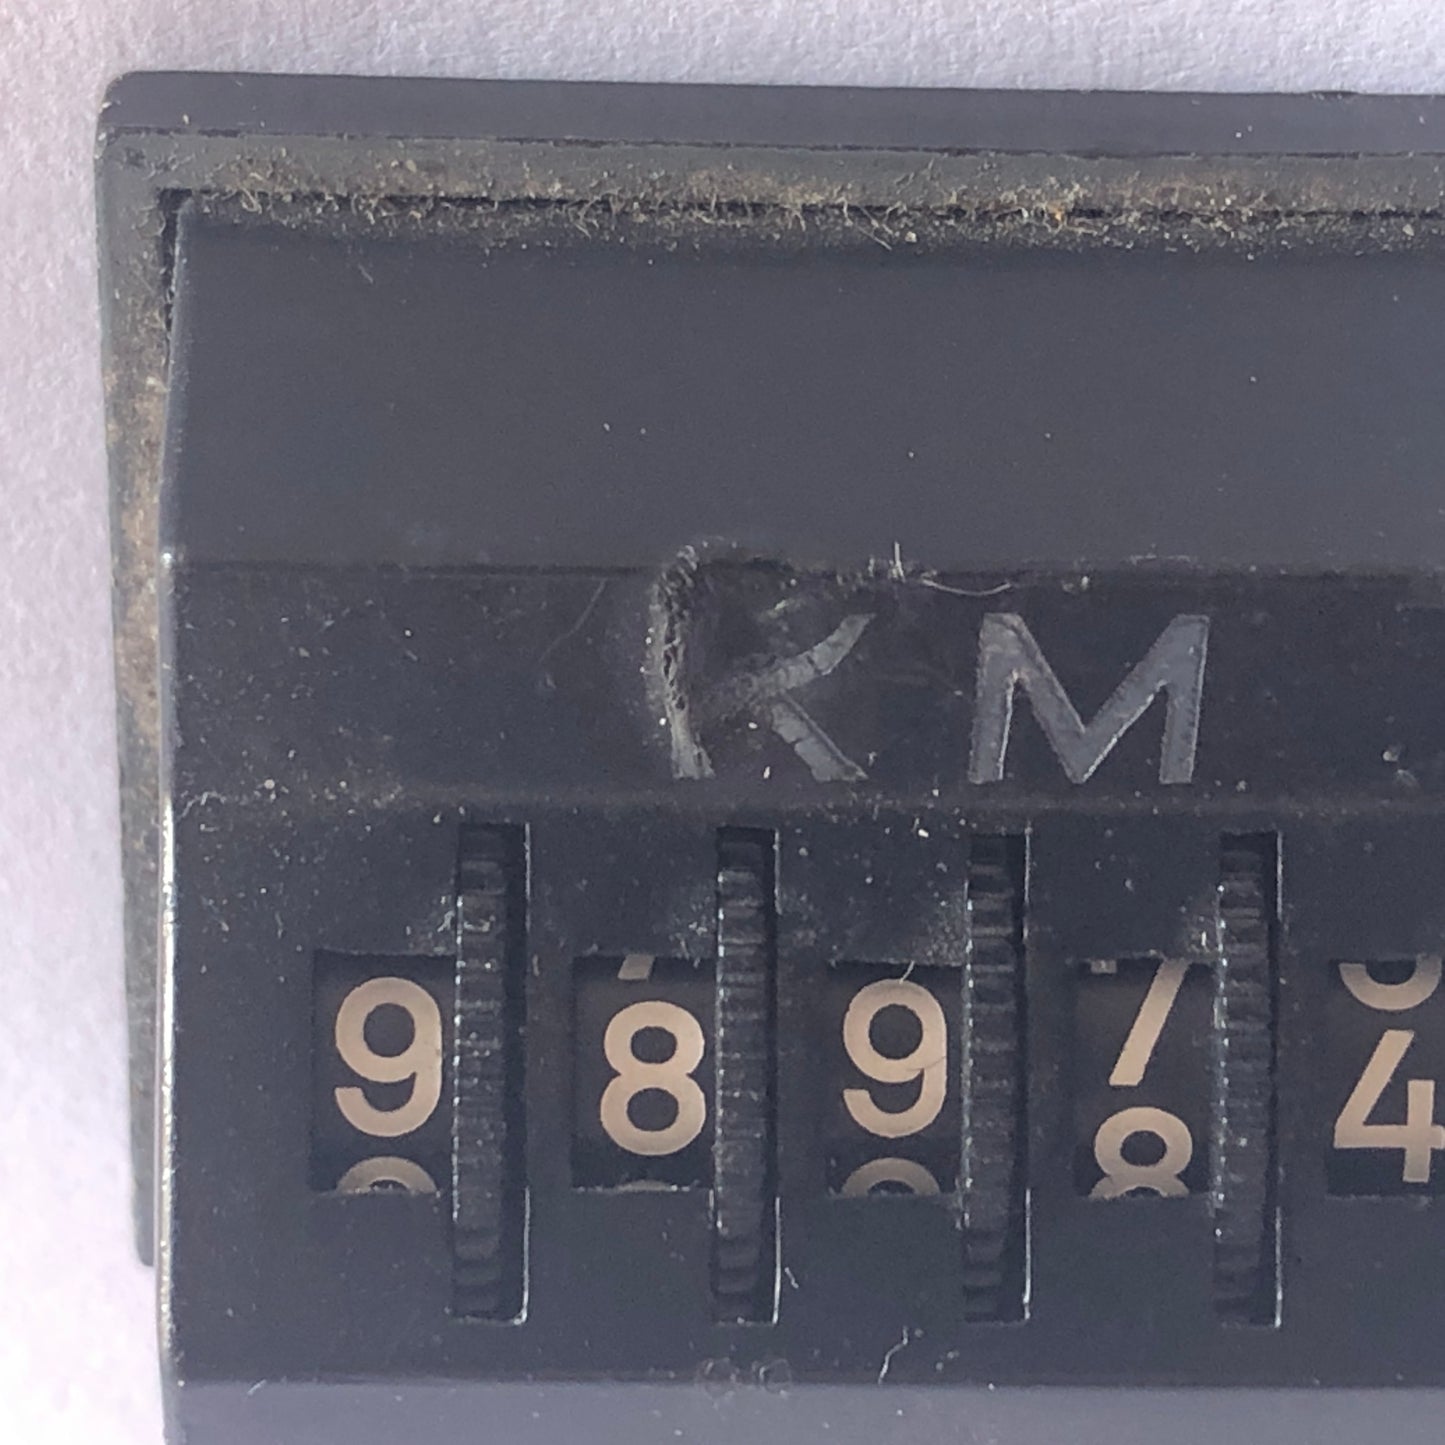 Automobilia, Vintage Manual Km Counter with Magnet